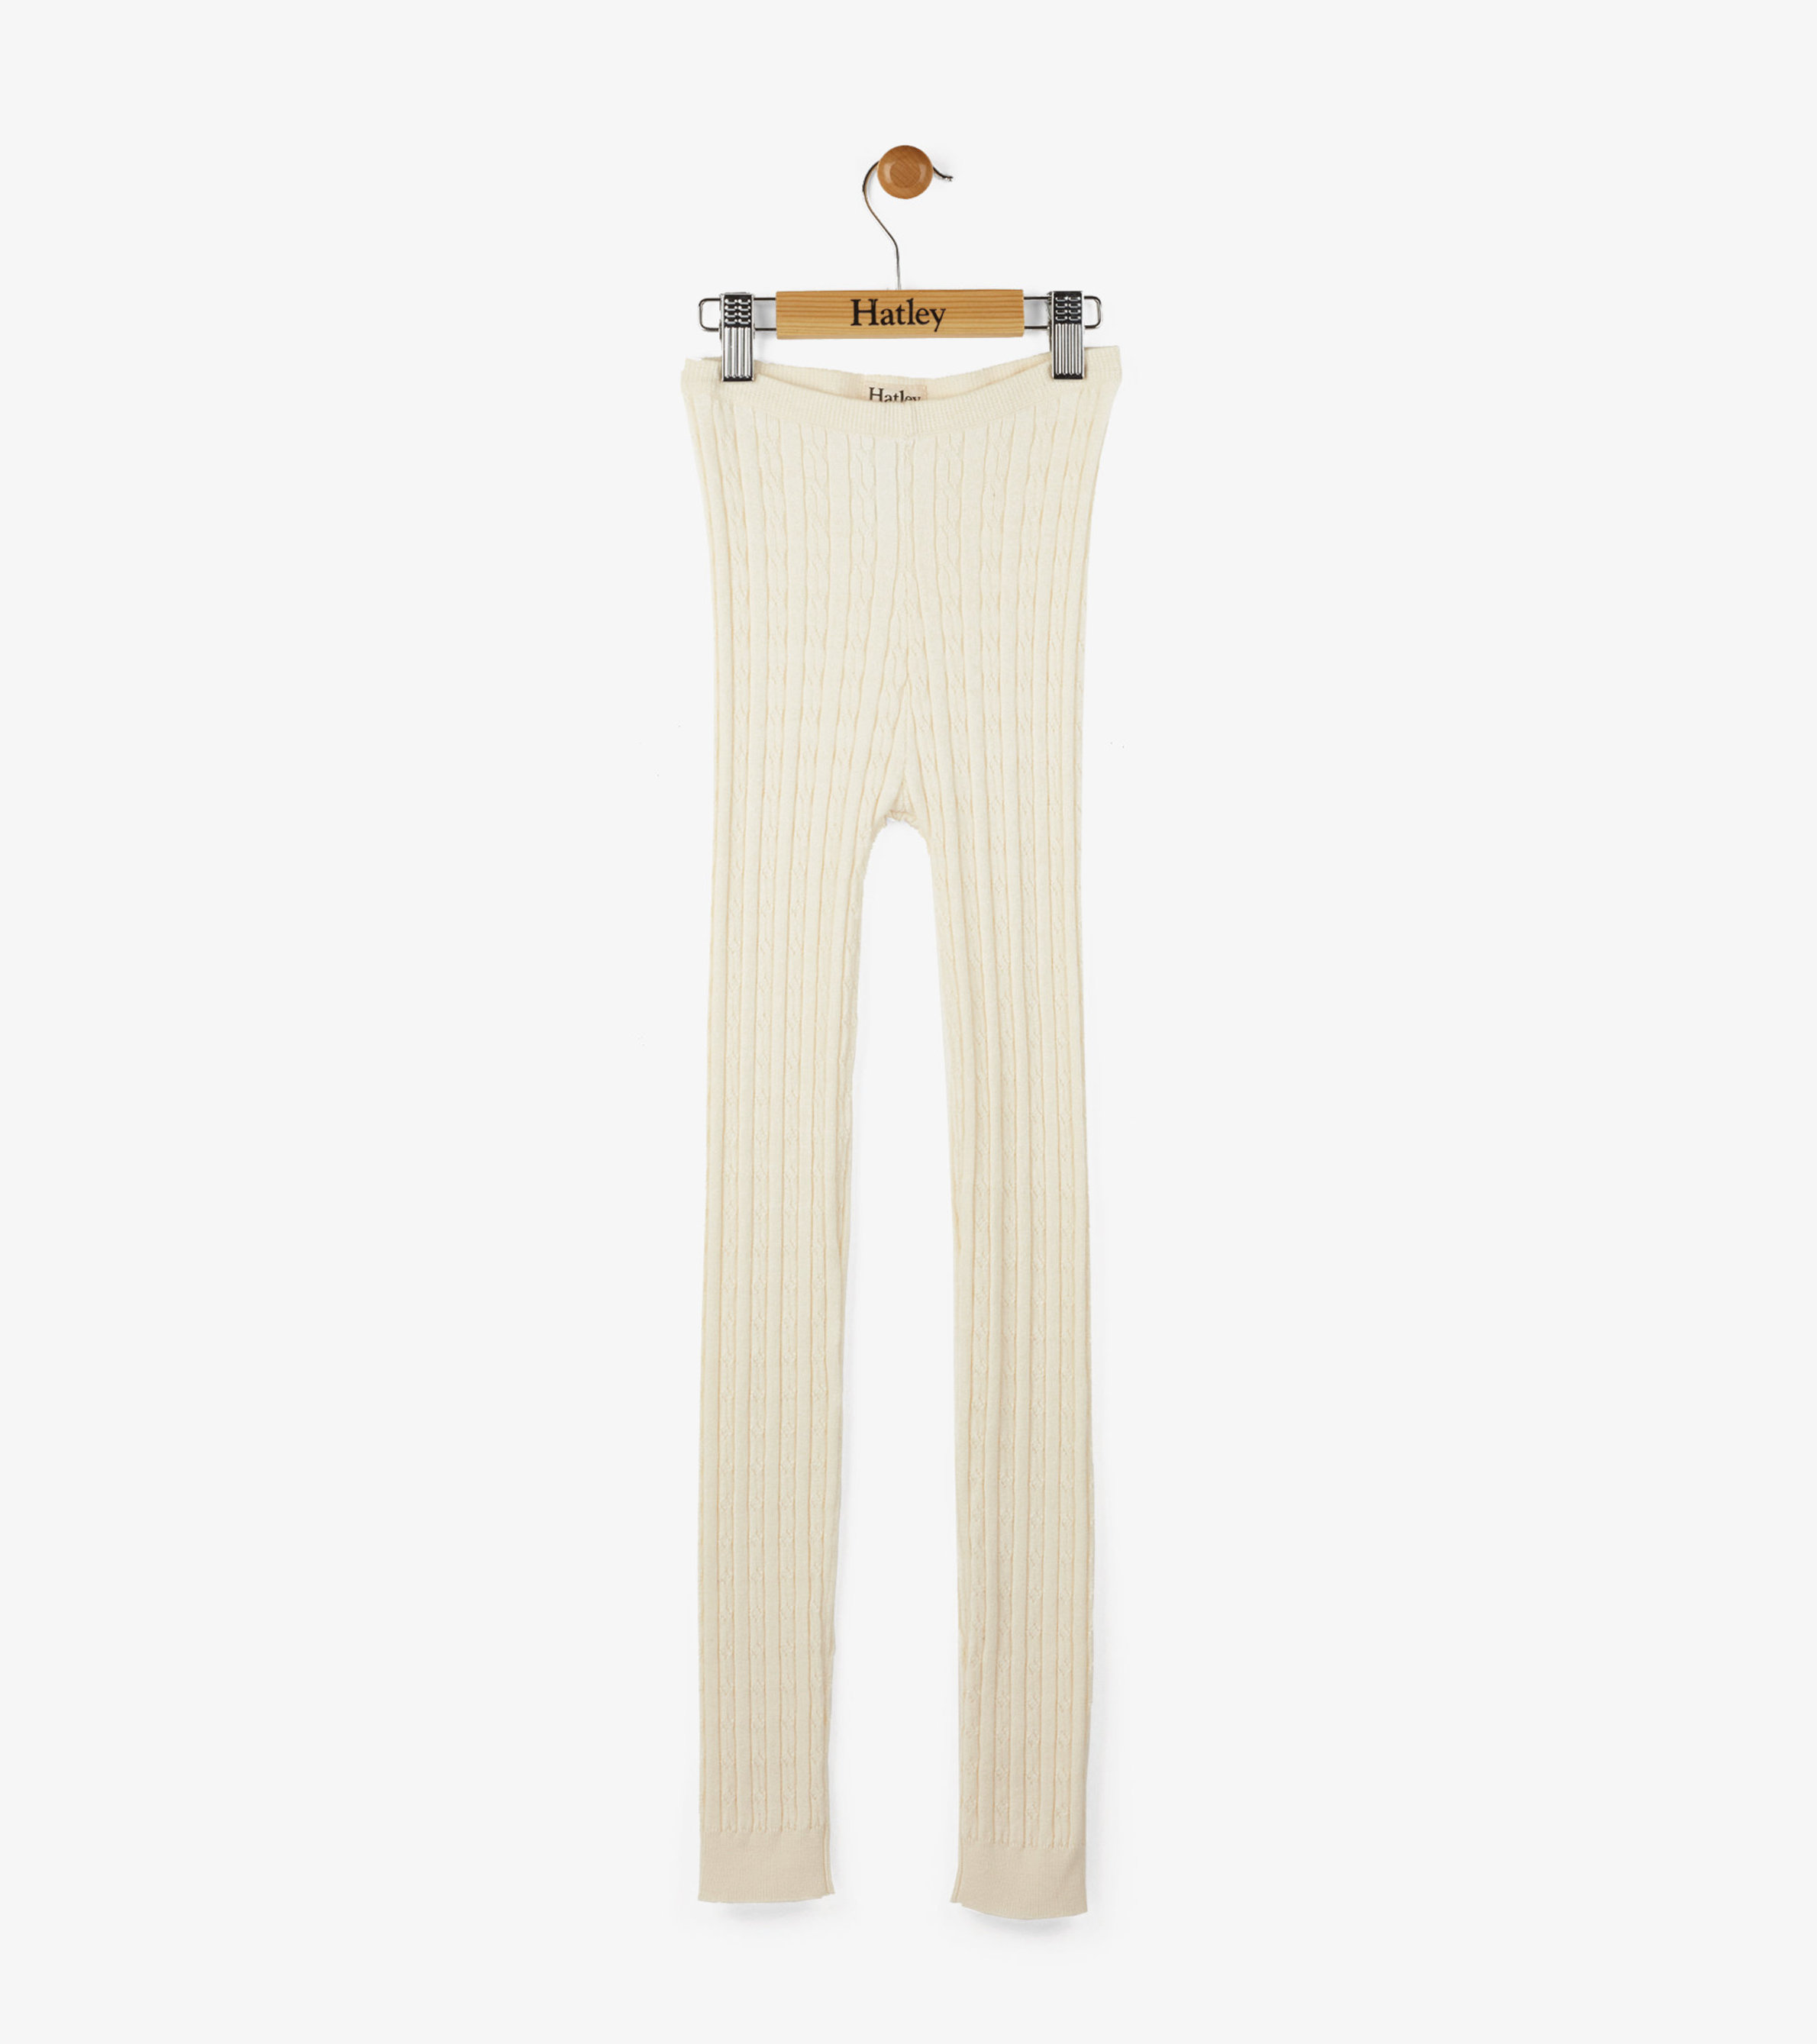  Cable Knit Tights Women